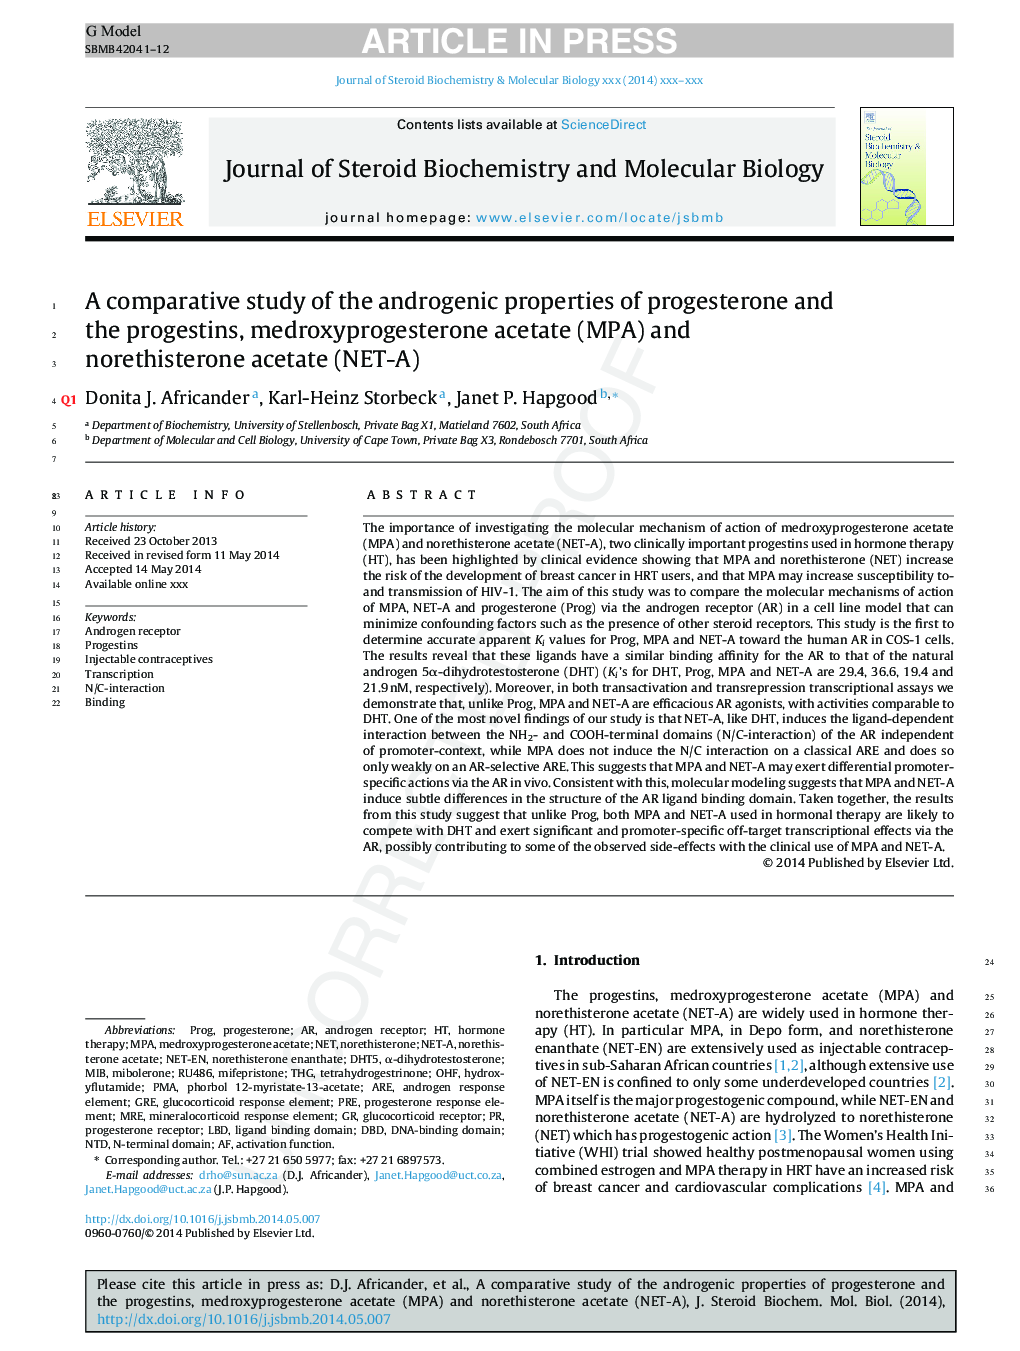 A comparative study of the androgenic properties of progesterone and the progestins, medroxyprogesterone acetate (MPA) and norethisterone acetate (NET-A)